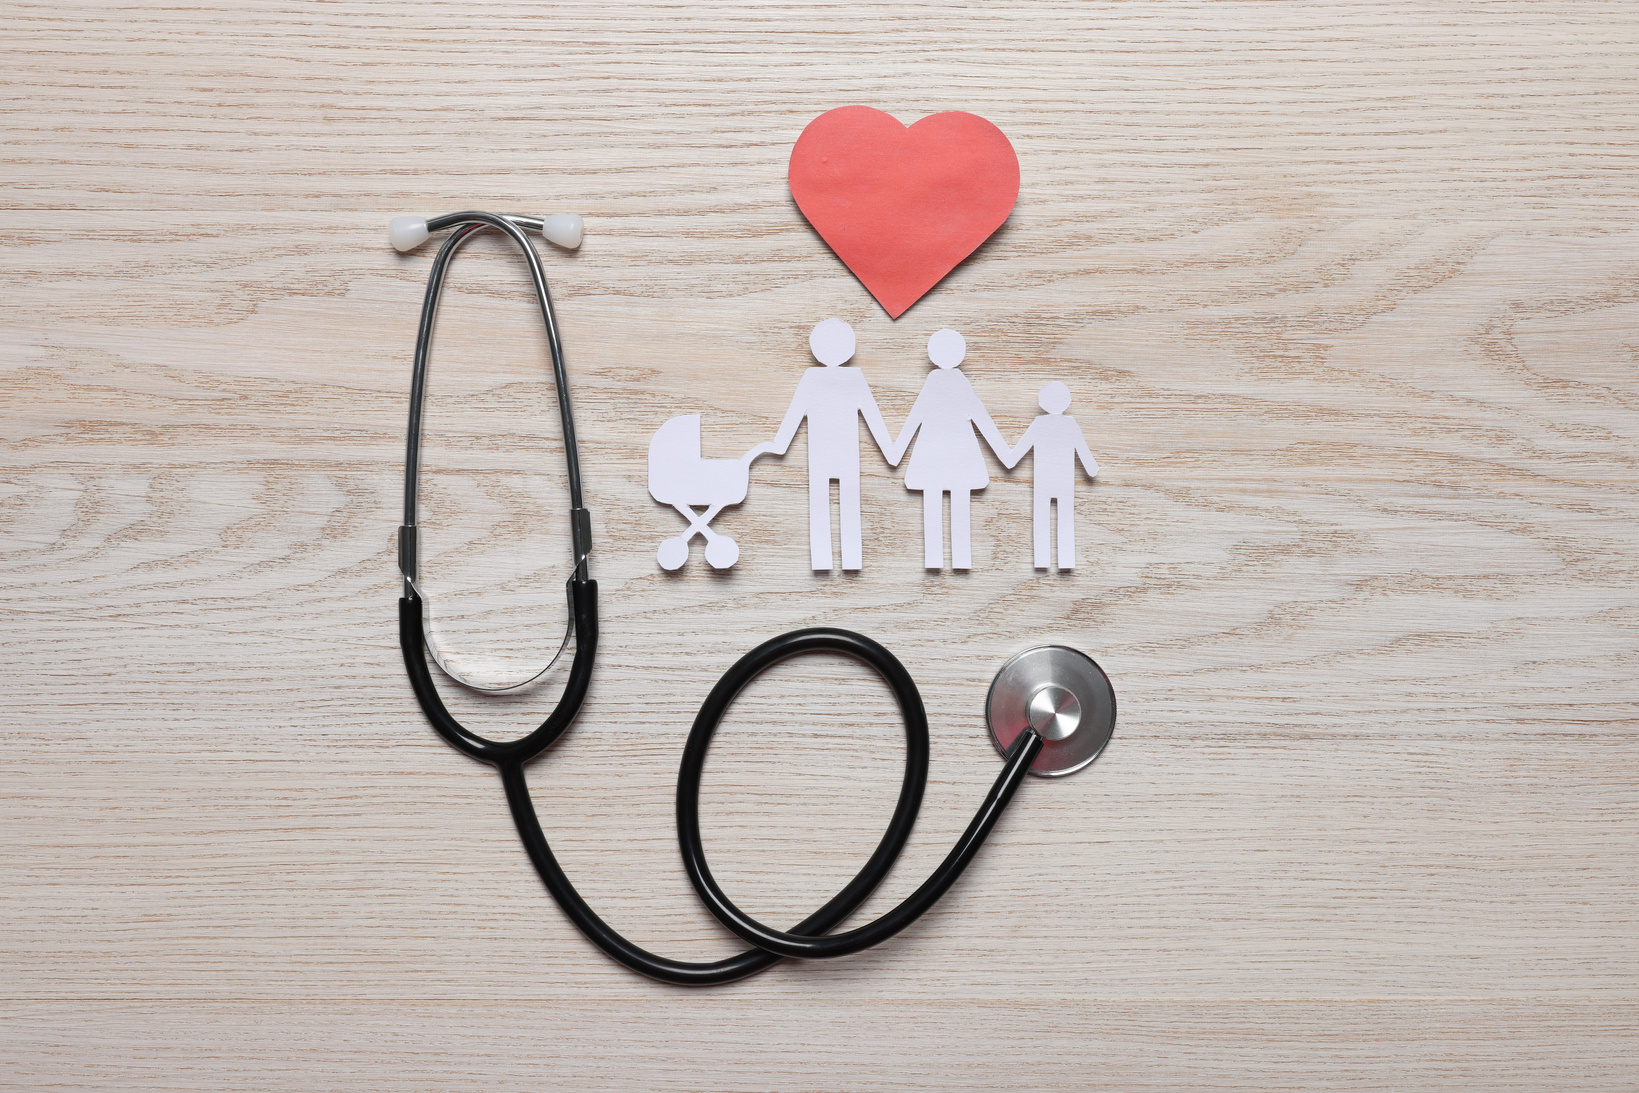 Paper  Cutout, Red Heart and Stethoscope on White Wooden Background, Flat Lay. Insurance Concept